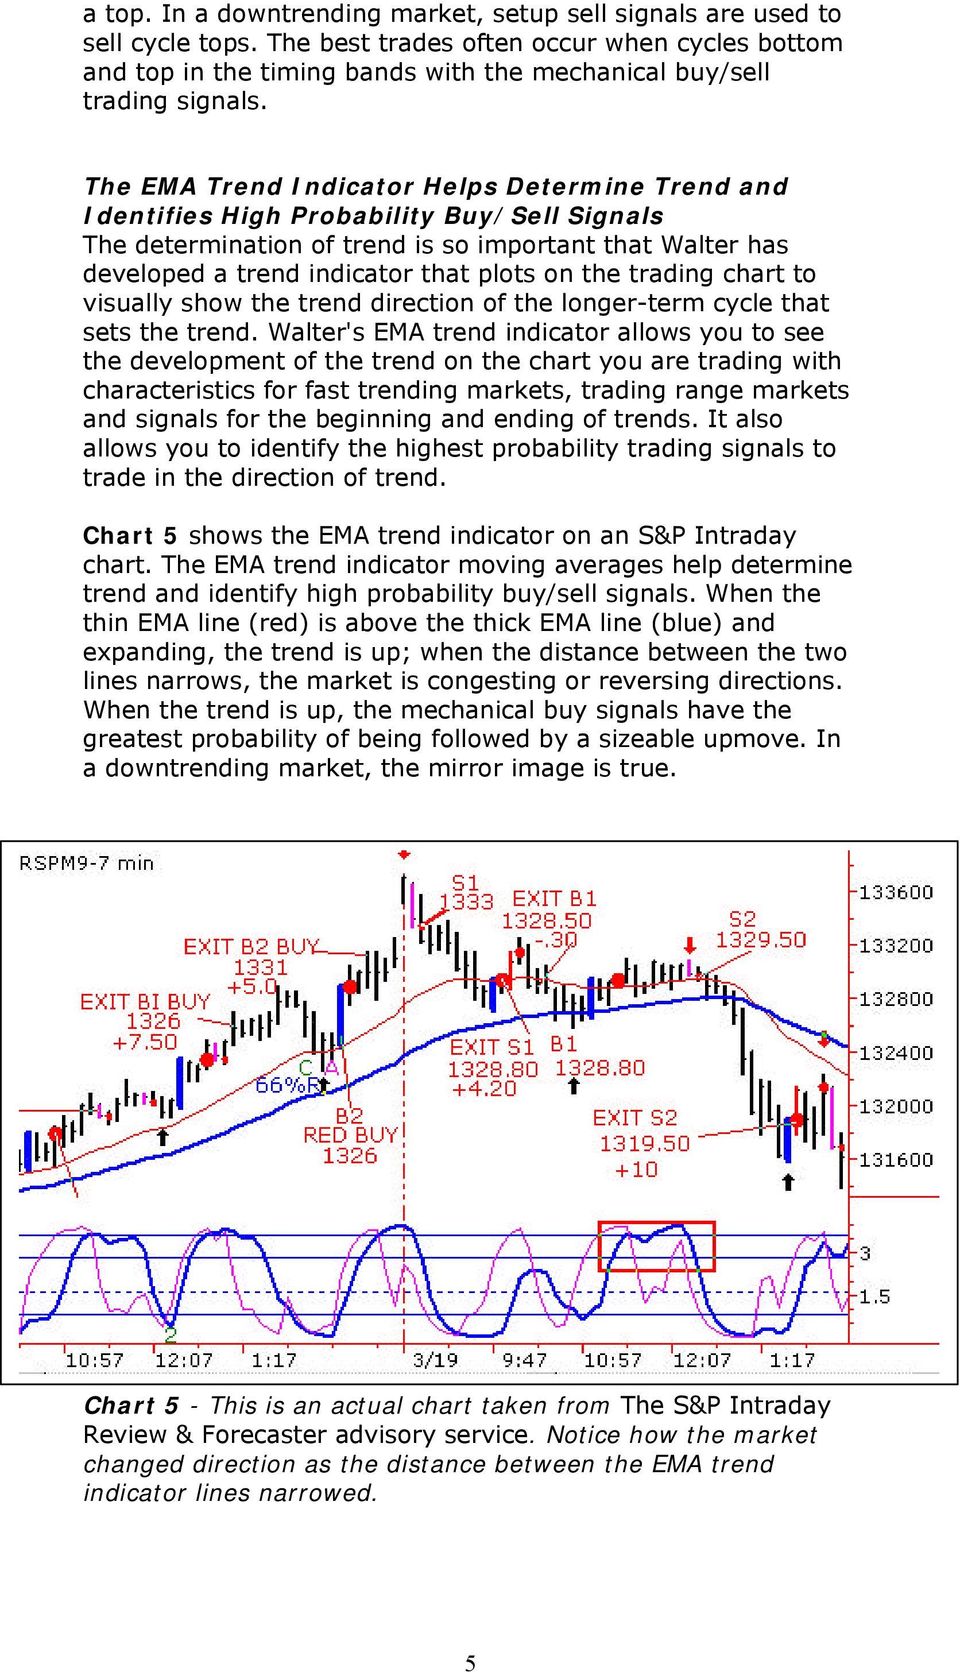 The EMA Trend Indicator Helps Determine Trend and Identifies High Probability Buy/Sell Signals The determination of trend is so important that Walter has developed a trend indicator that plots on the